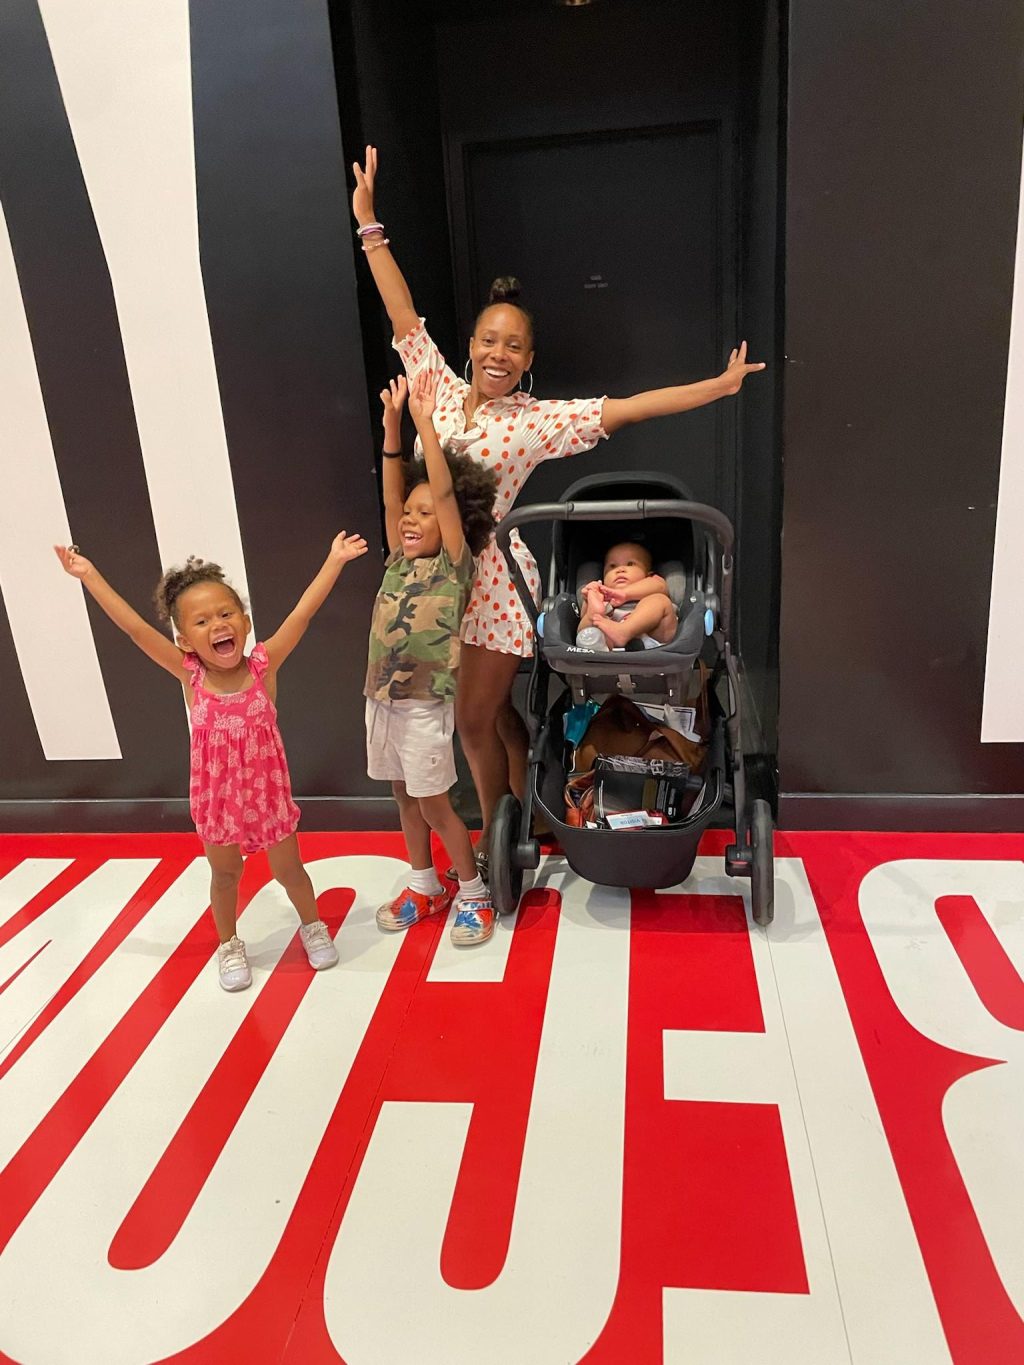 Ali Holness-Roland smiles with her three kids at the Hirshhorn Museum in Washington, D.C. July 2, 2022. Roland found art as resistance in teaching her children their inner greatness, she said. Photo courtesy of Ali Holness-Roland